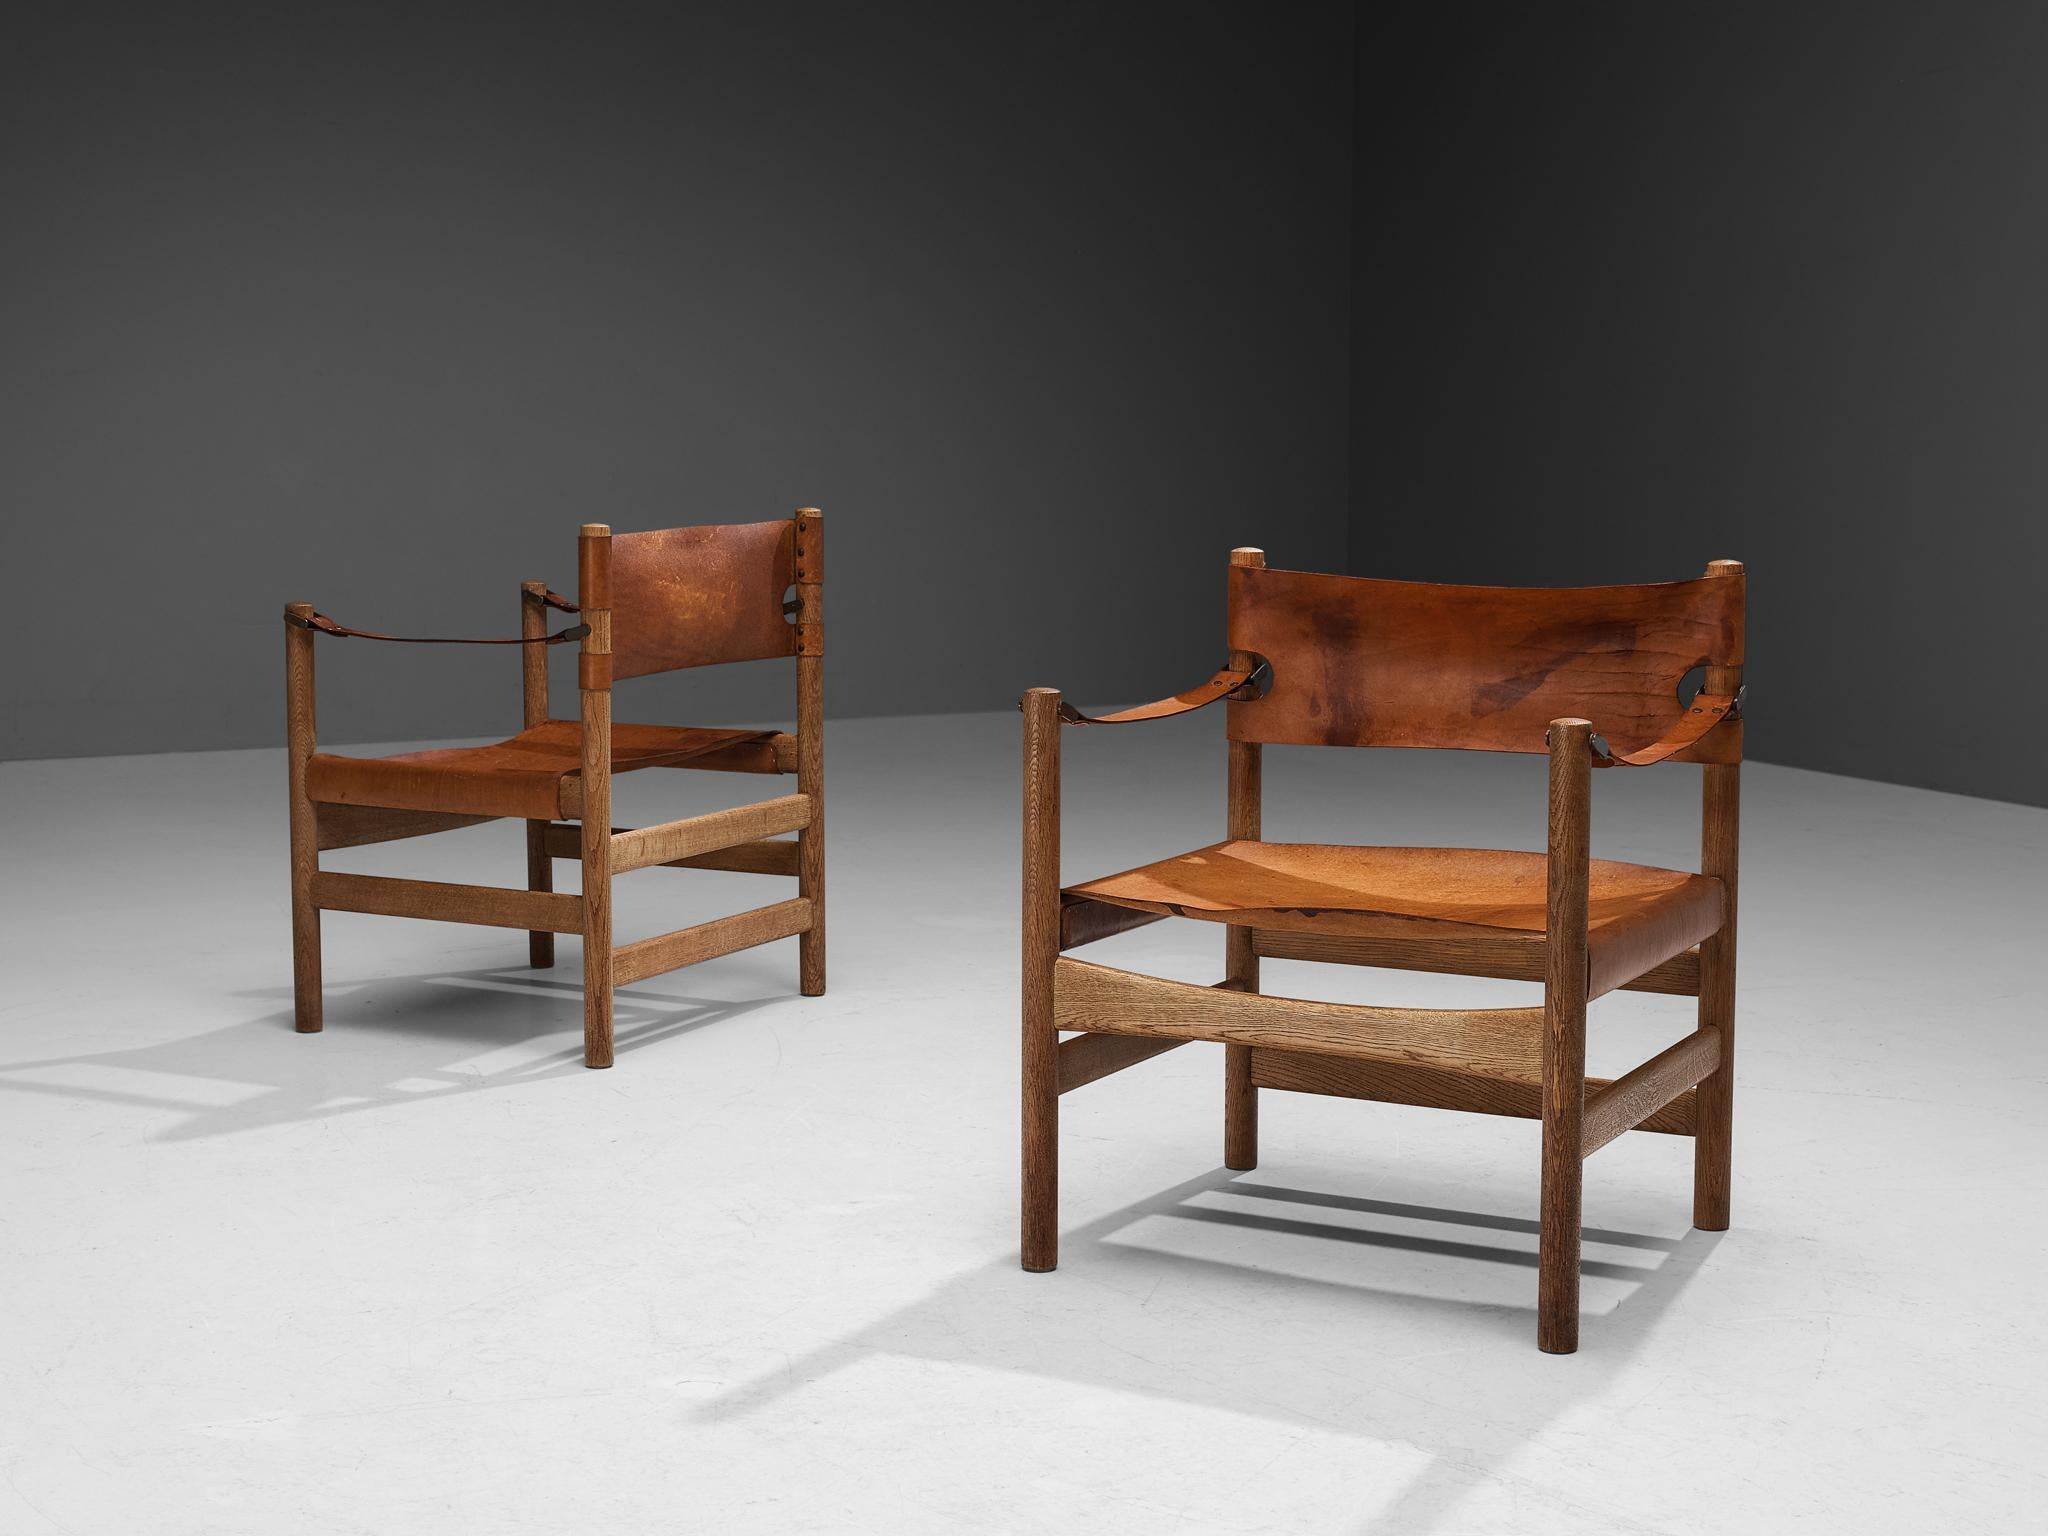 Børge Mogensen for Fredericia Stolefabrik, pair of ‘Safari’ armchairs model 2221, saddle leather, oak, brass, Denmark, 1960s

This rare pair of armchairs reminds of the classical foldable 'director-chairs', yet this design by Danish designer Børge